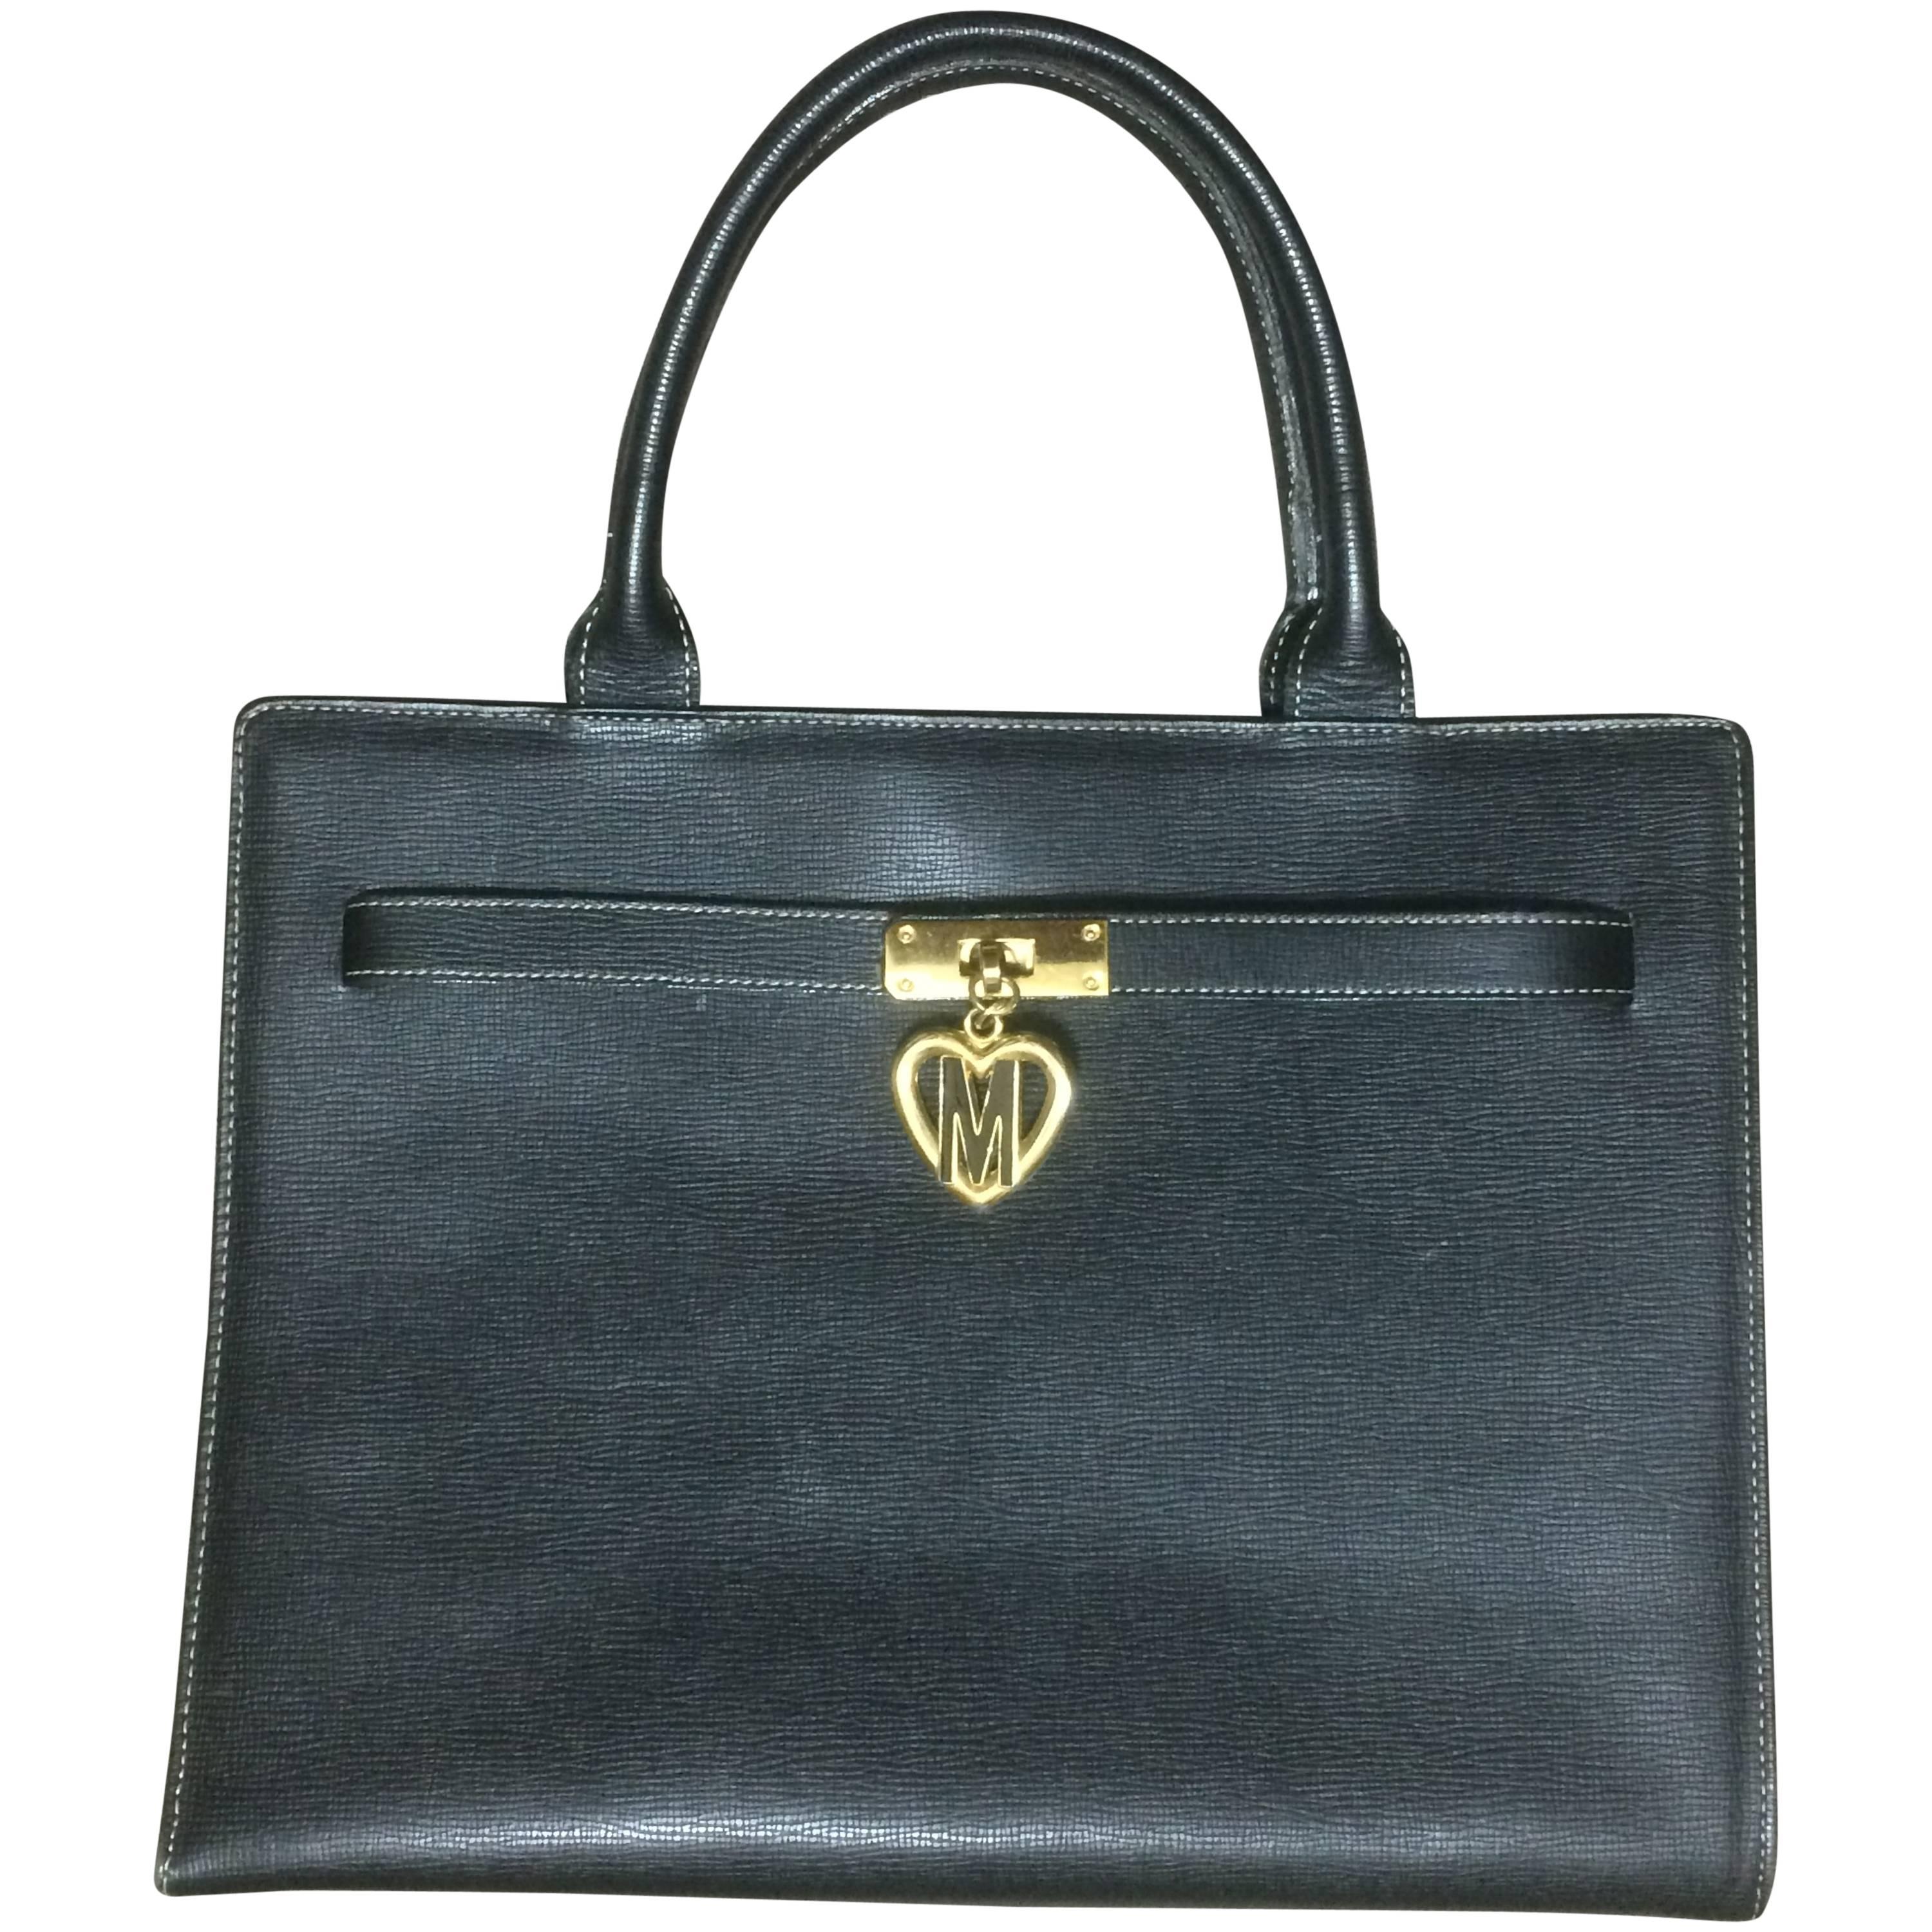 Vintage MOSCHINO black leather tote bag in Kelly purse style with iconic M charm For Sale